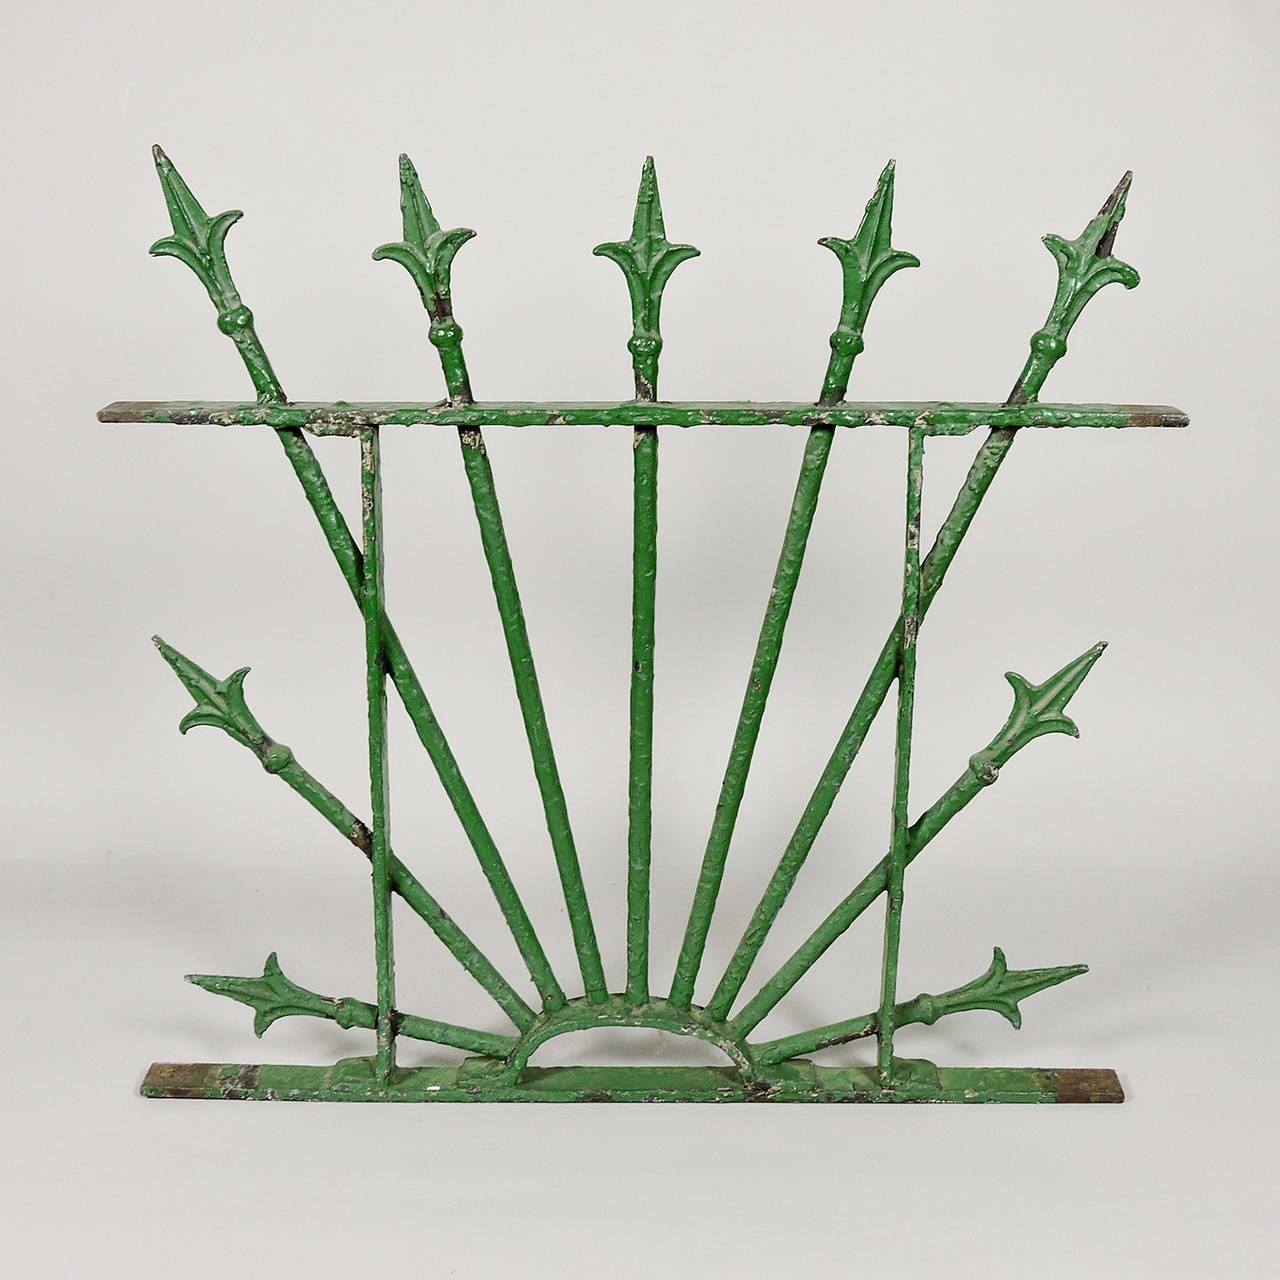 Pair of green painted wrought iron architectural elements. Originally designed and used as window grates, with Fleur-de-lis tips, the combination of color and dramatic structure make for great wall hangings.
Dimensions: 23.5 x 25 x 1.5 inches.